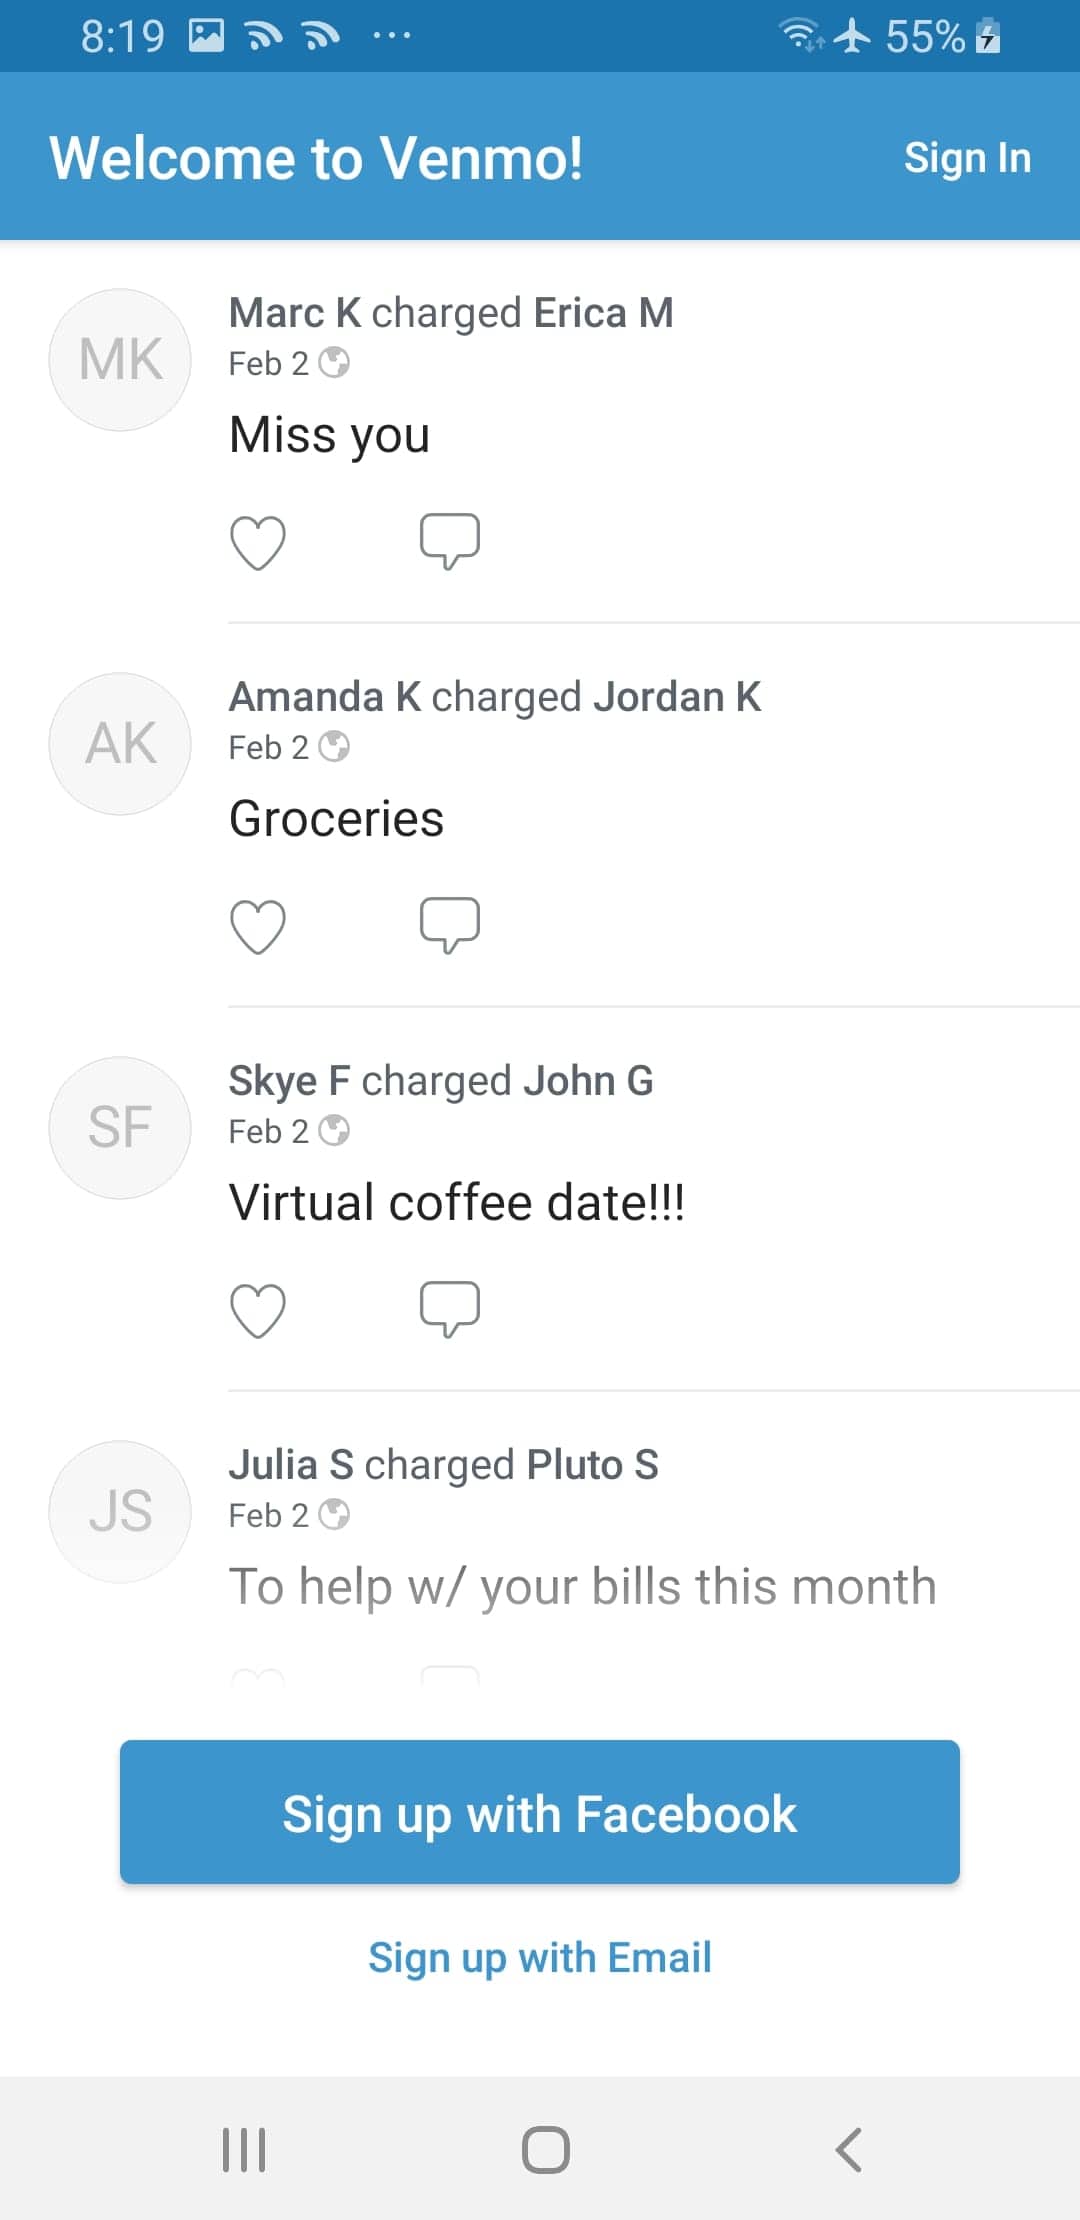 Screenshot From Our Venmo Review